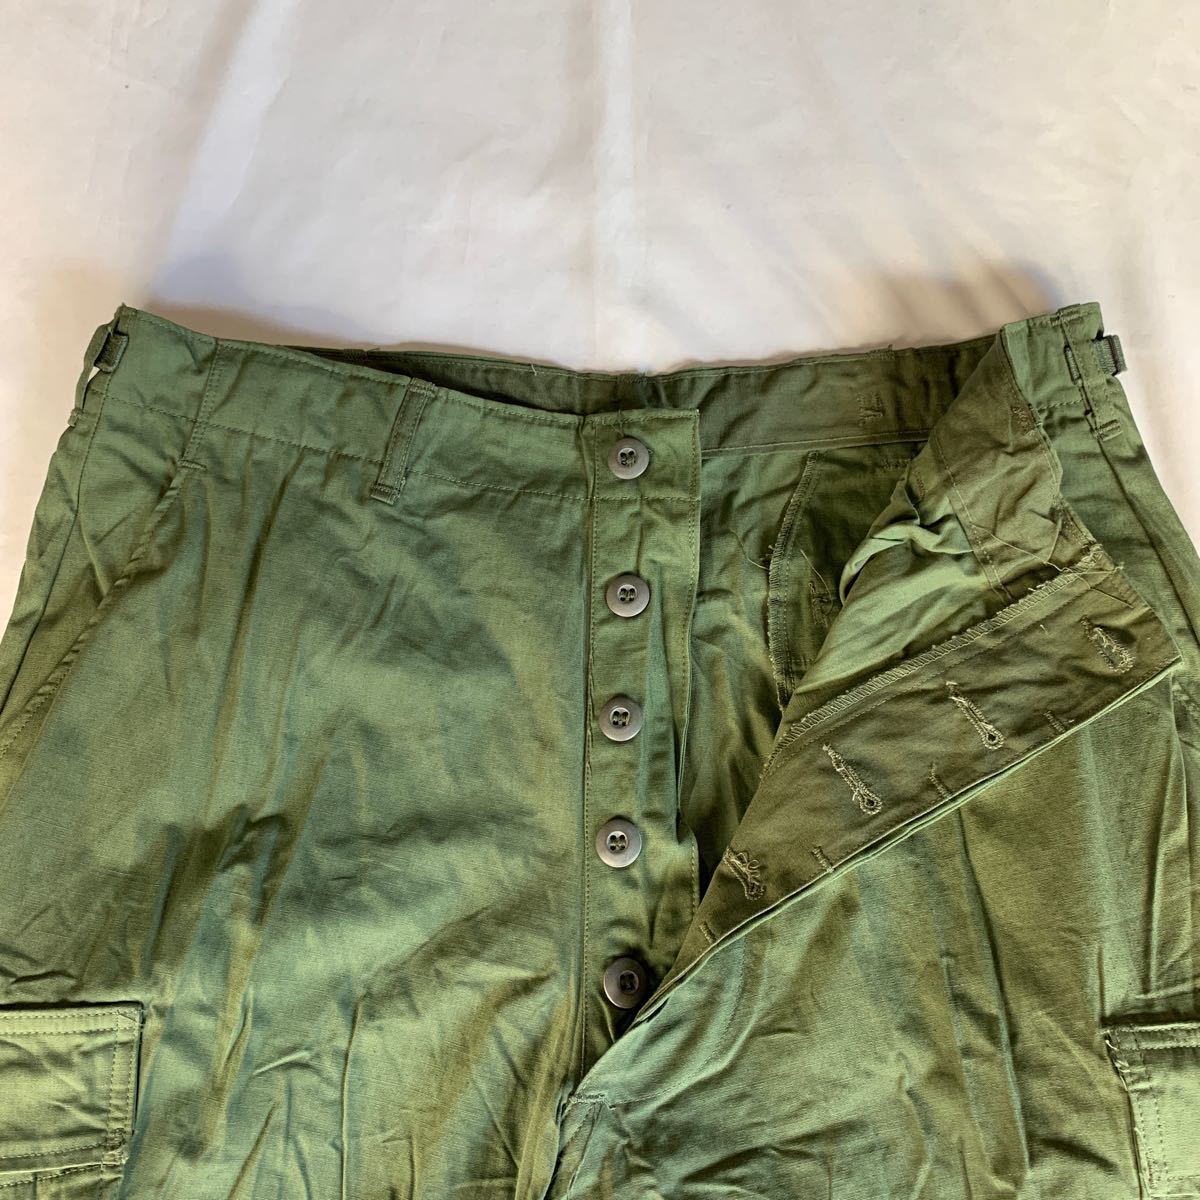 60s U.S.ARMY JUNGLE FATIGUE TROUSERS 3rd DEAD STOCK USARMY ジャングルファティーグ カーゴパンツ ノンリップ デッドストック 送料無料 の画像5